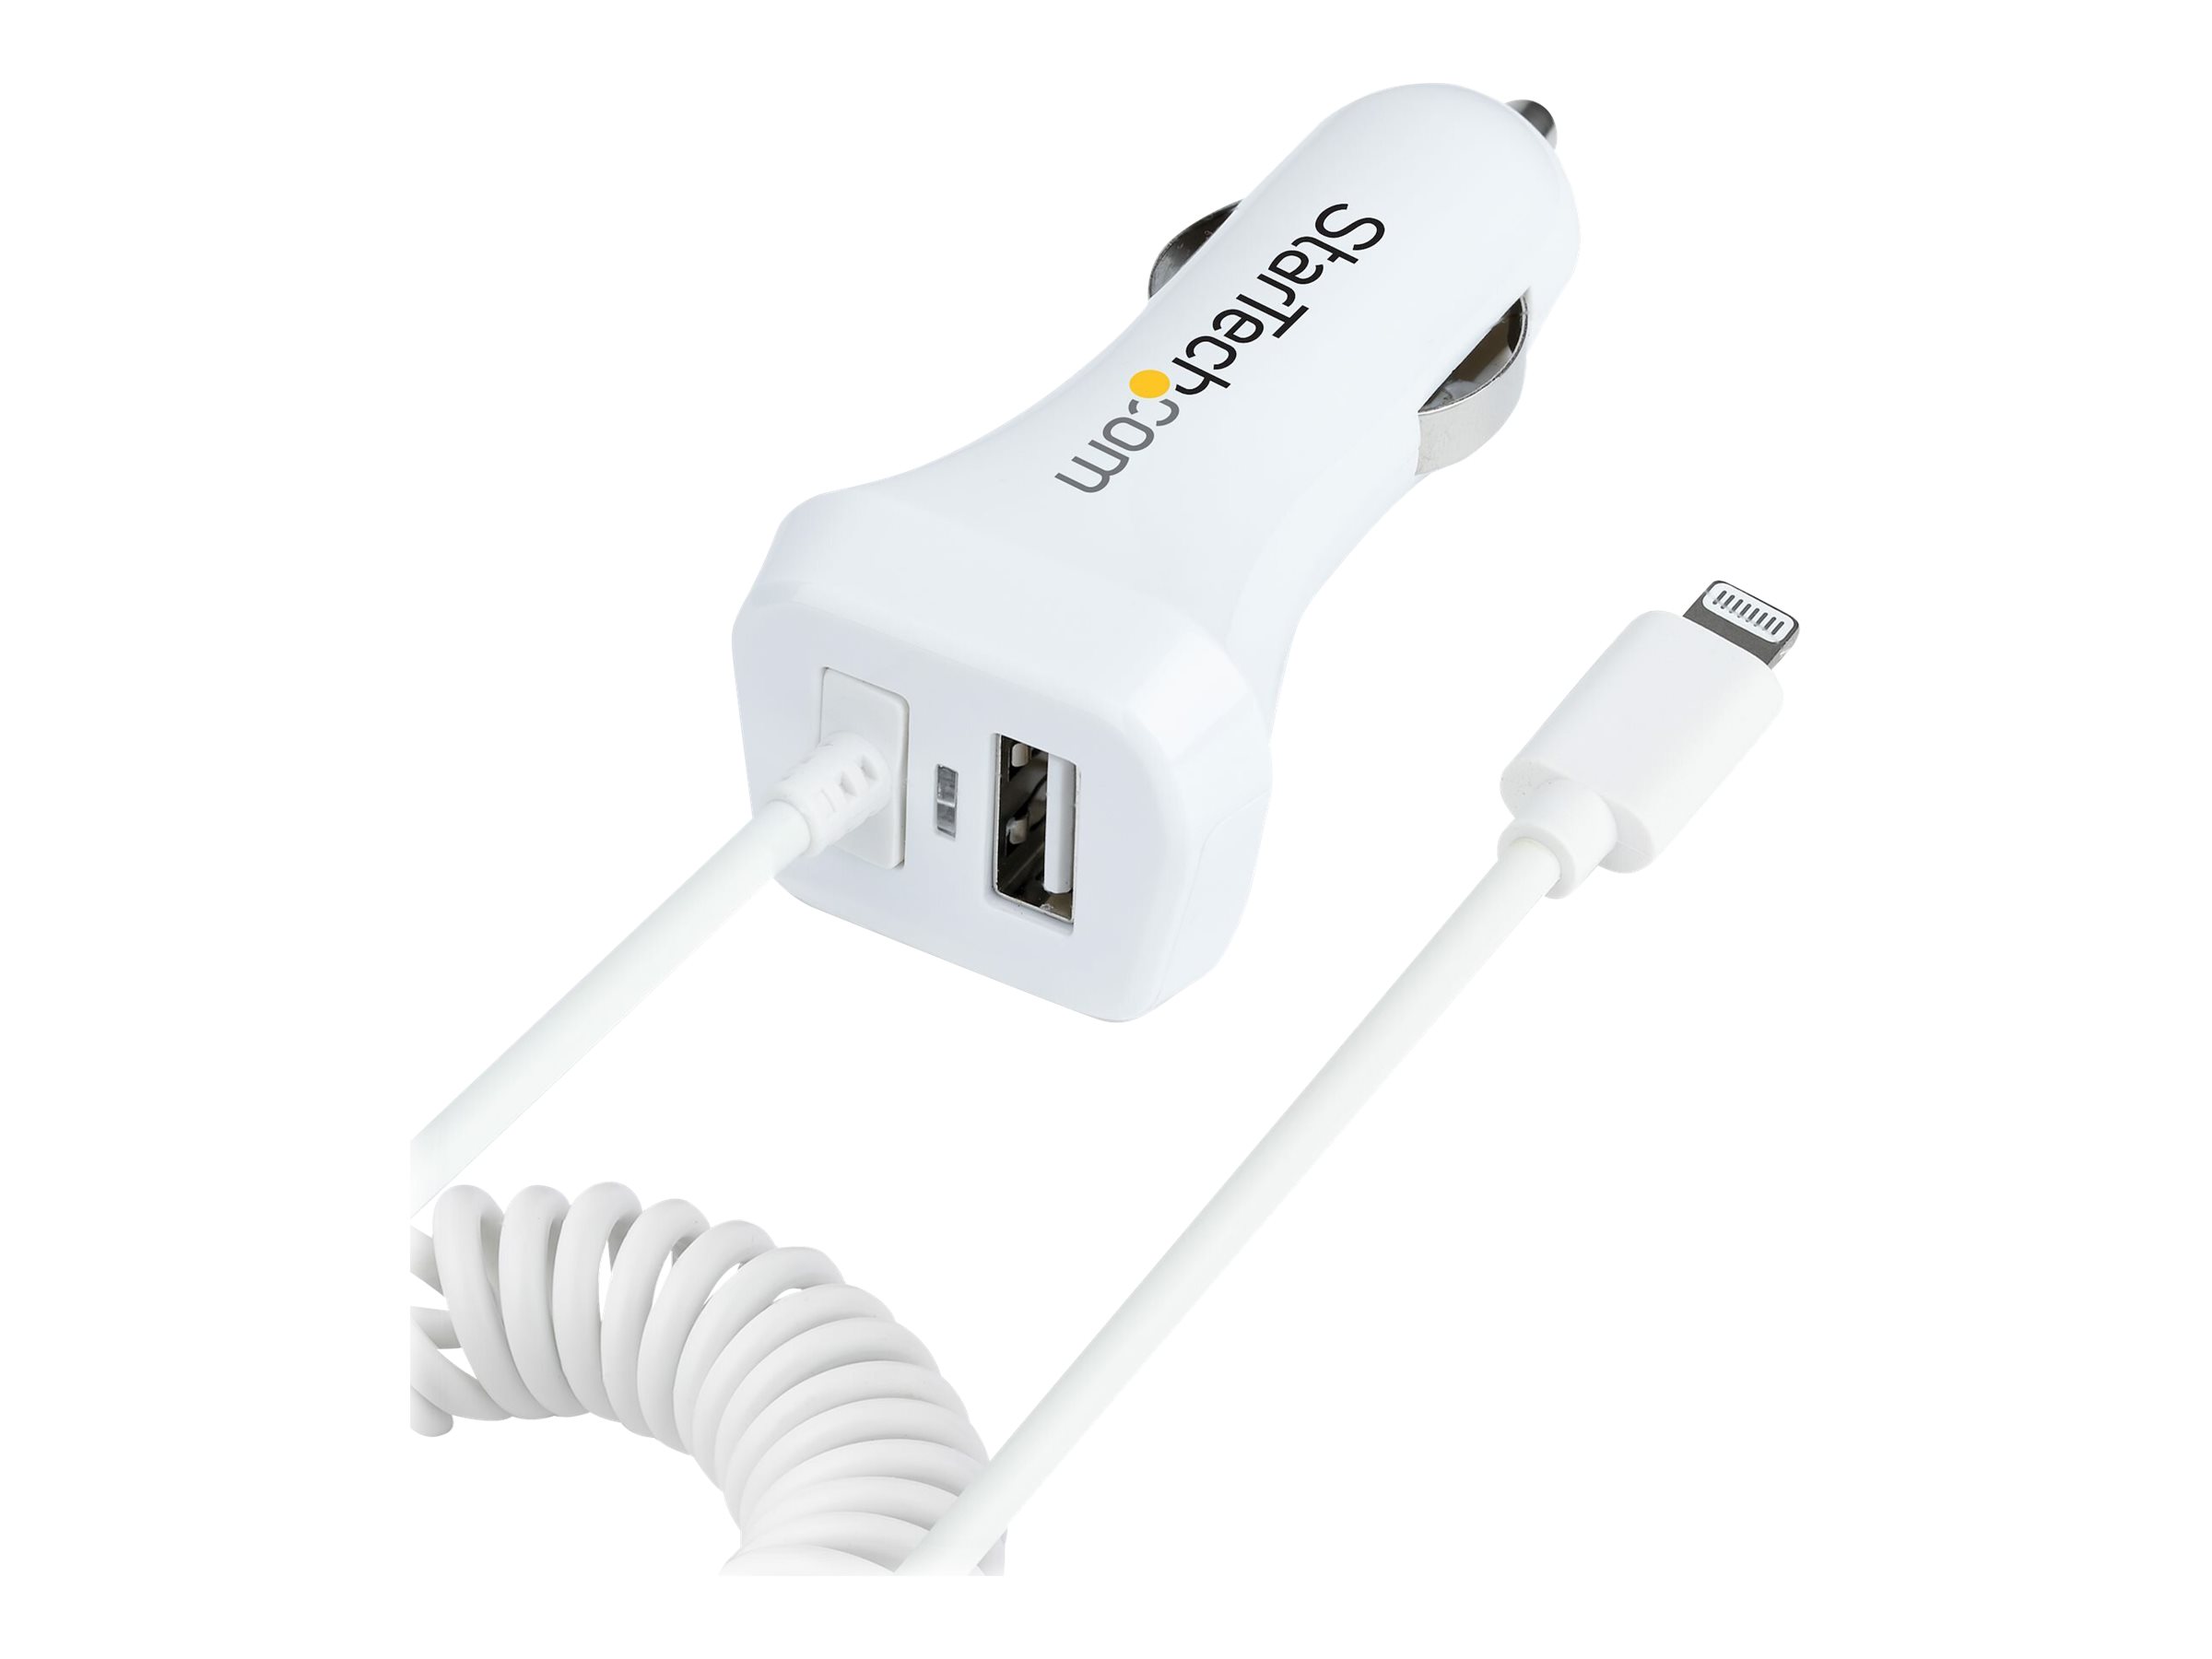 StarTech.com Lightning Car Charger with 1m Coiled Lightning Cable, 12W, White, 2 Port USB Car Charger Adapter for Phones and Tablets, In Car Apple iPhone/iPad Charger w/ Built-in Cord - Dual USB Car Charger (USBLT2PCARW2) - Adaptateur d'alimentation pour voiture - 12 Watt - 4.2 A - 2 connecteurs de sortie (USB, Lightning) - blanc - USBLT2PCARW2 - Adaptateurs électriques et chargeurs